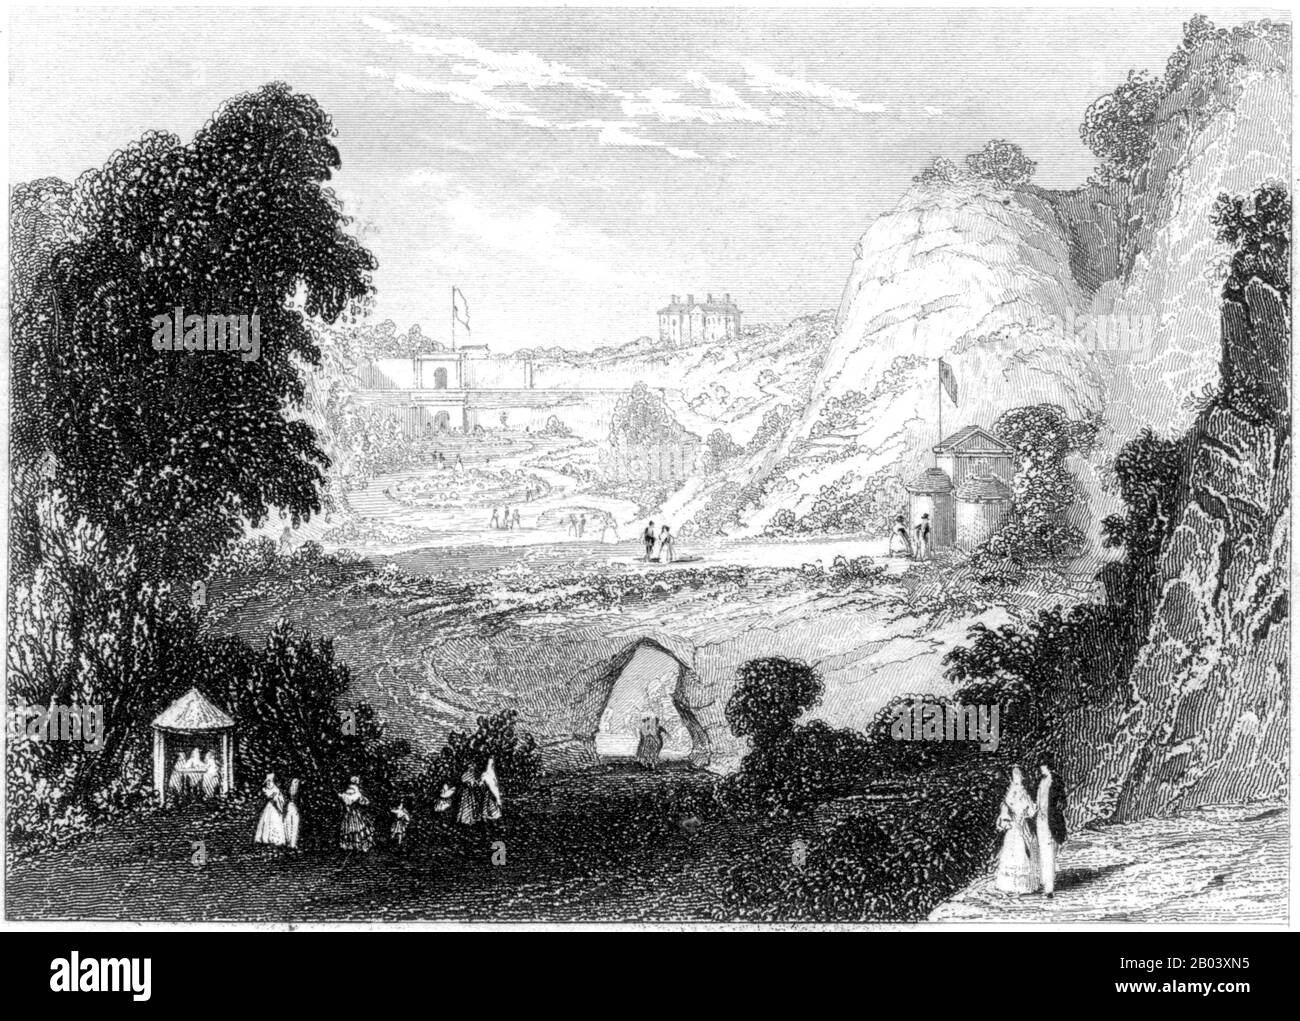 Engraving of Rosherville Gardens, Gravesend scanned at high resolution from a book printed in 1851. This image is believed to be free of all copyright. Stock Photo